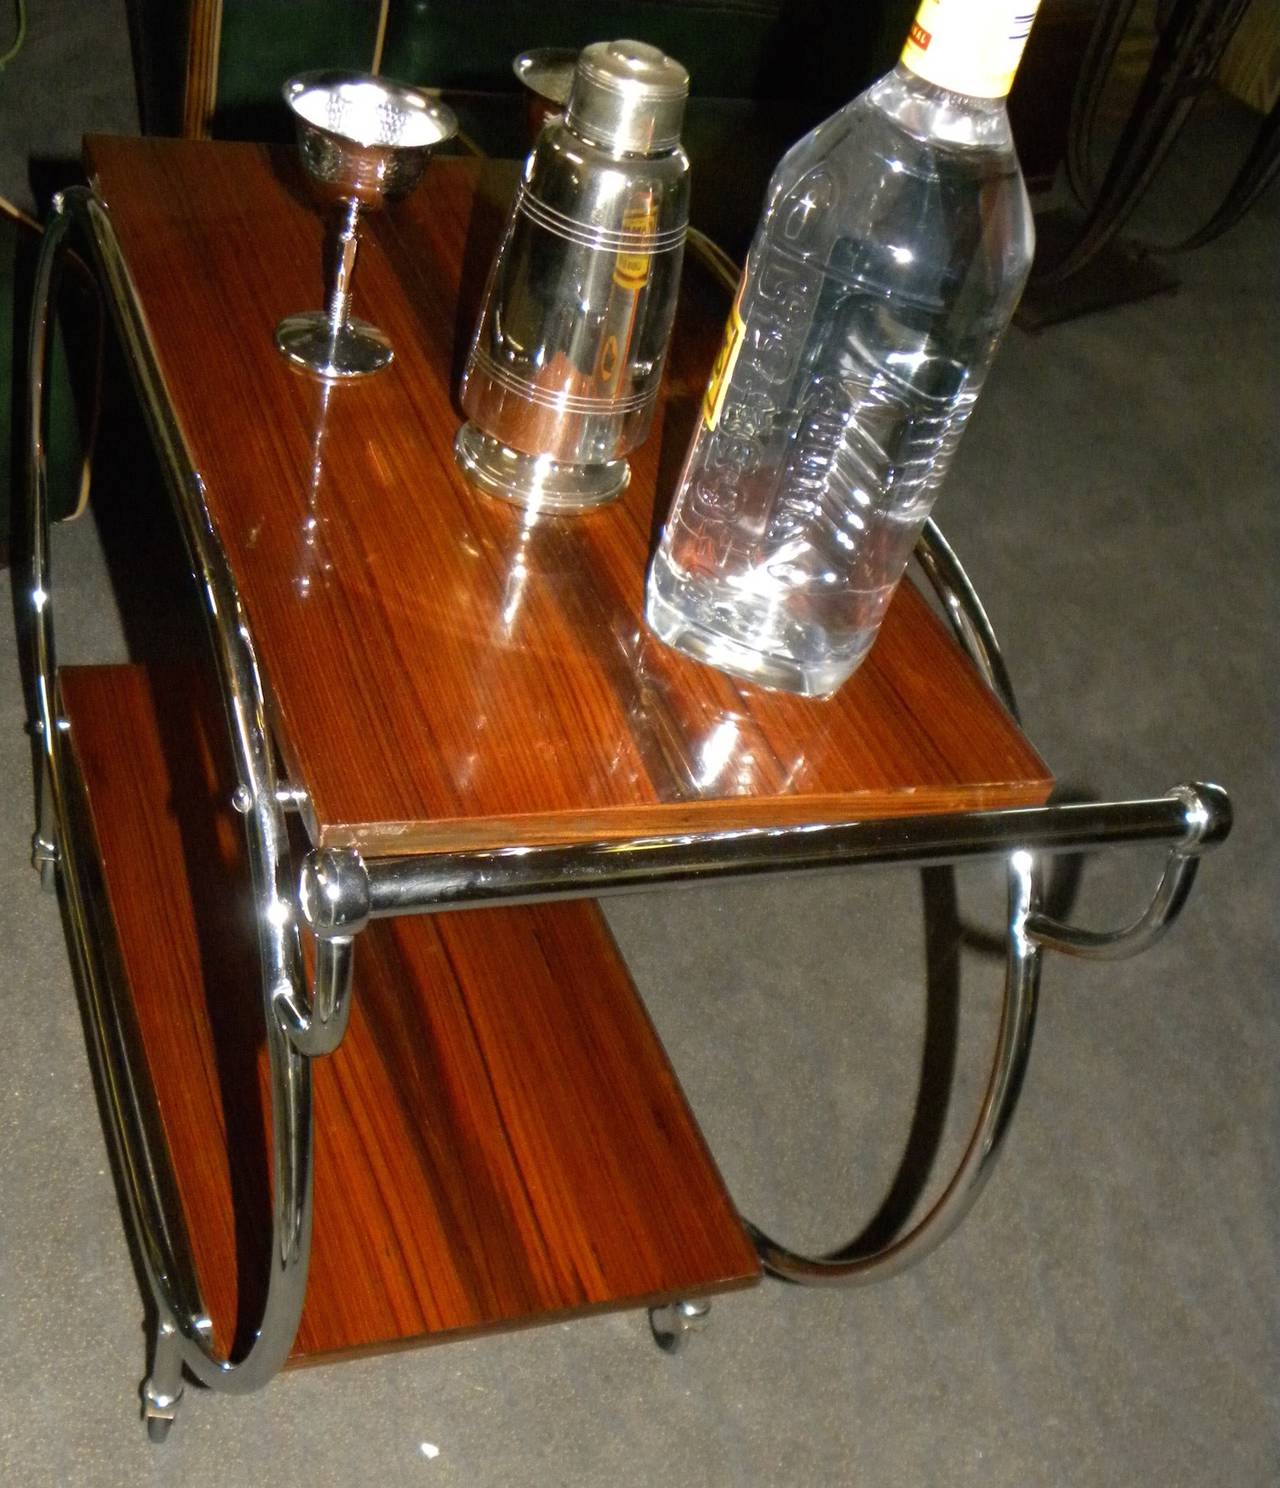 A perfectly restored bar cart. Great Art Deco design with newly re-chromed frame. Great storage for bottles, shakers, champagne buckets and just about anything you need for that sophisticated after or before dinner libation. A must for cocktail